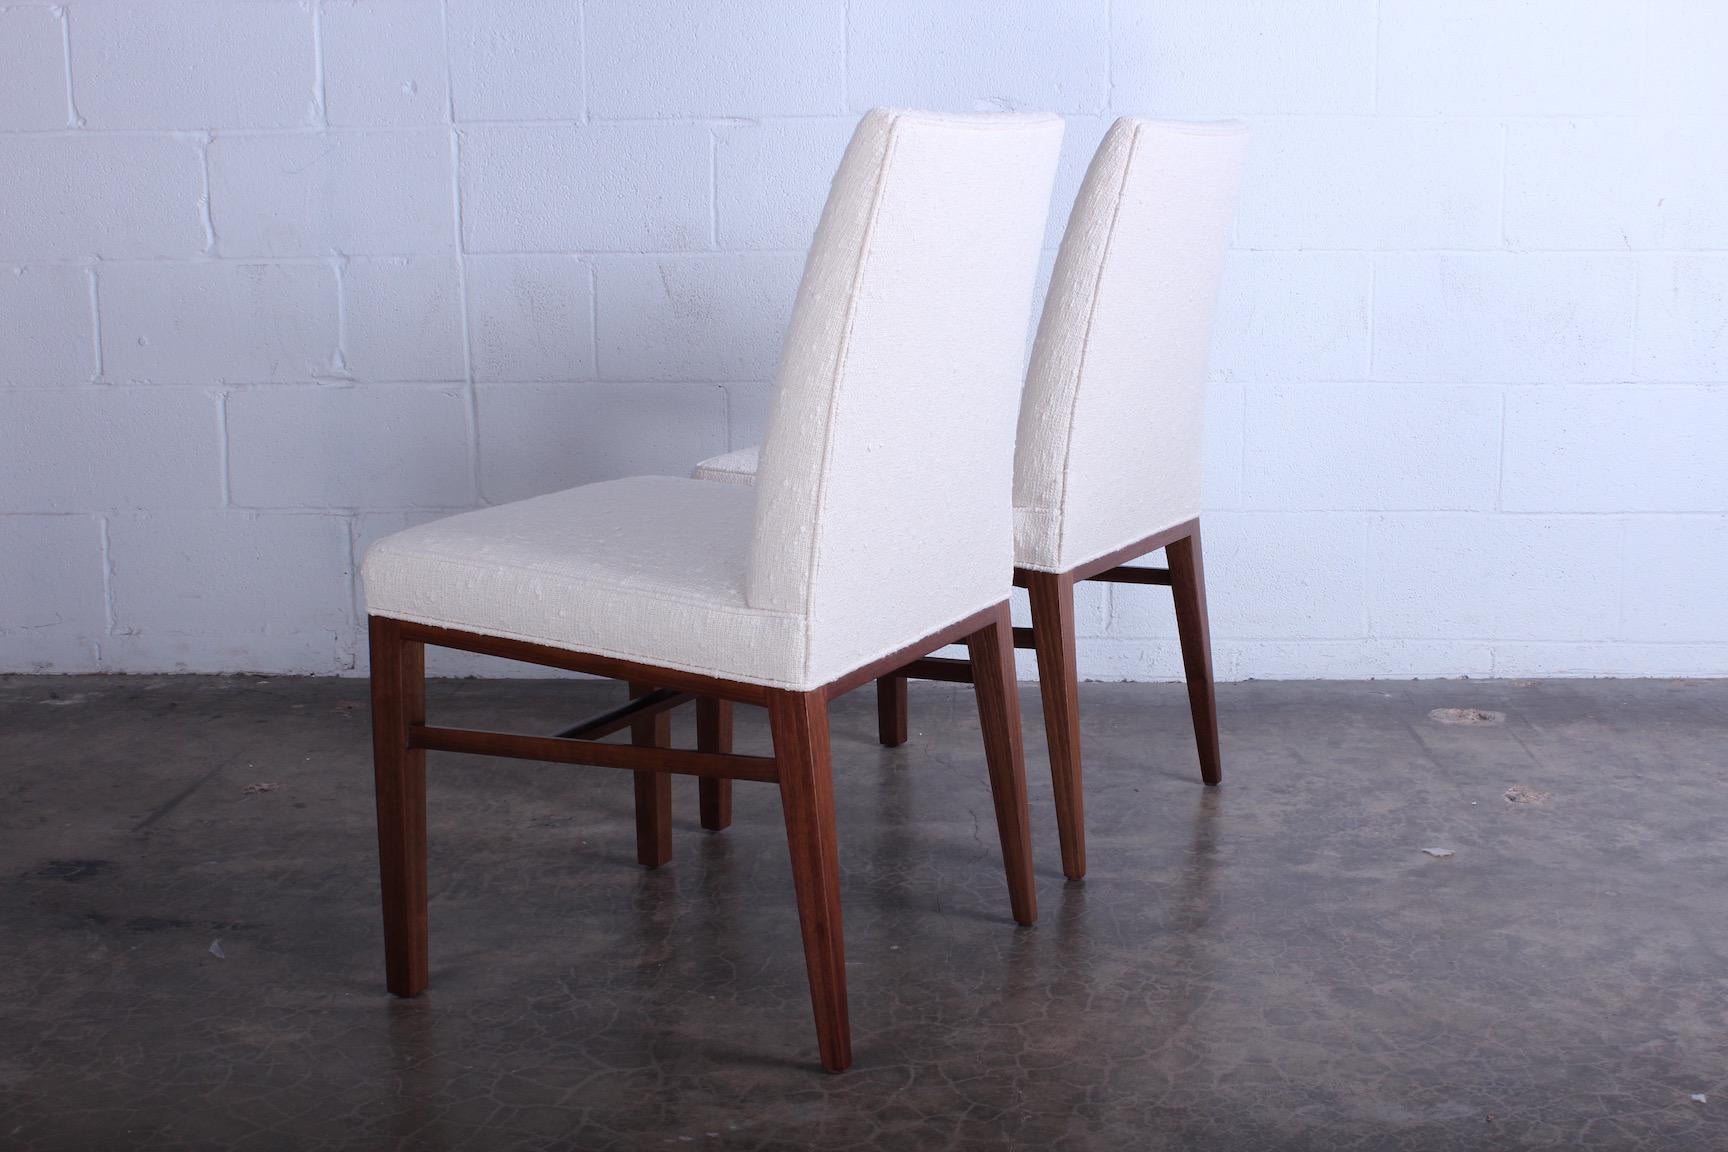 Set of Ten Dining Chairs by Edward Wormley for Dunbar 6